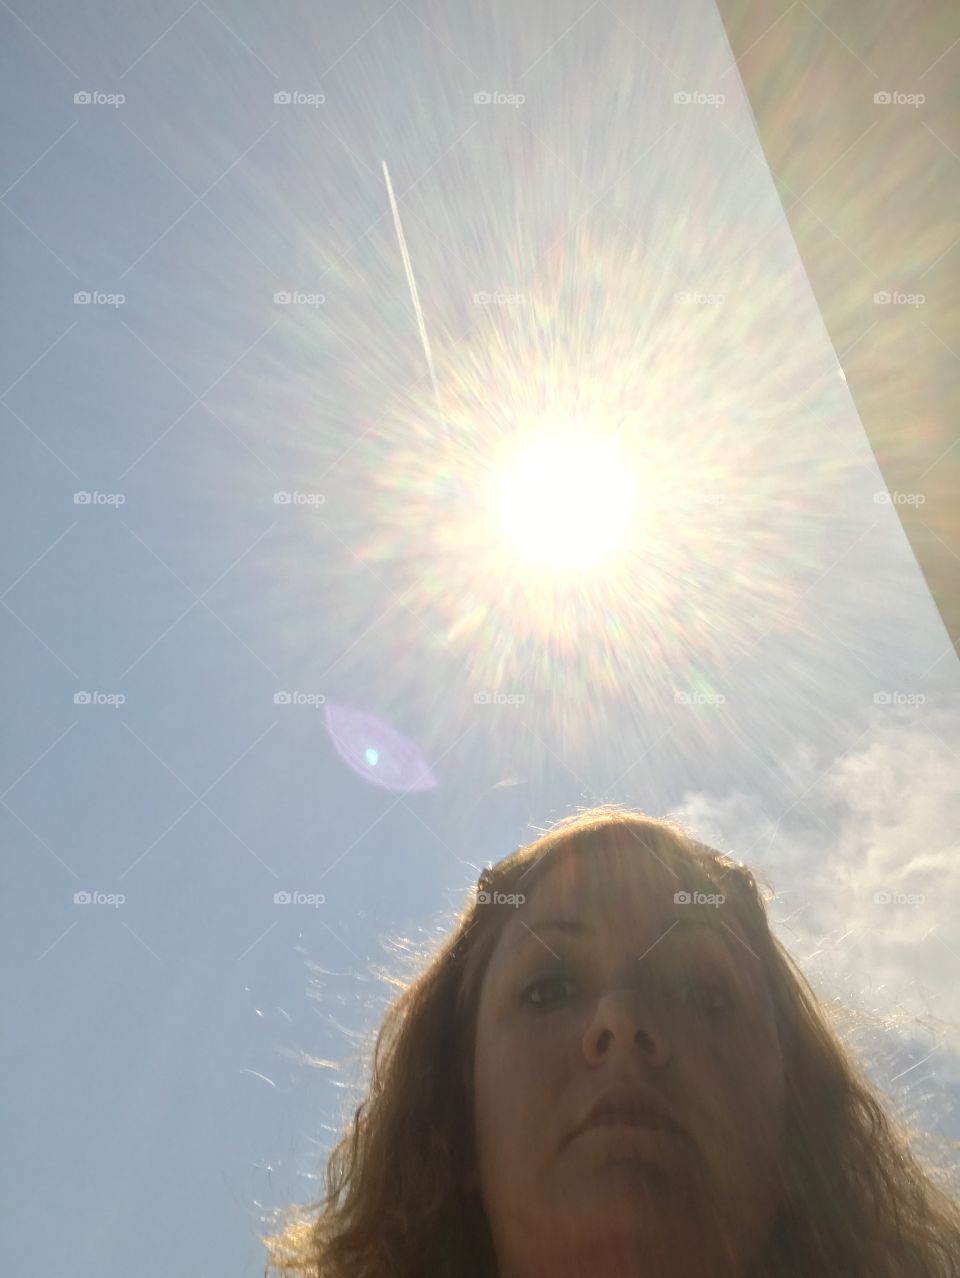 Sun selfie during the eclipse before totality